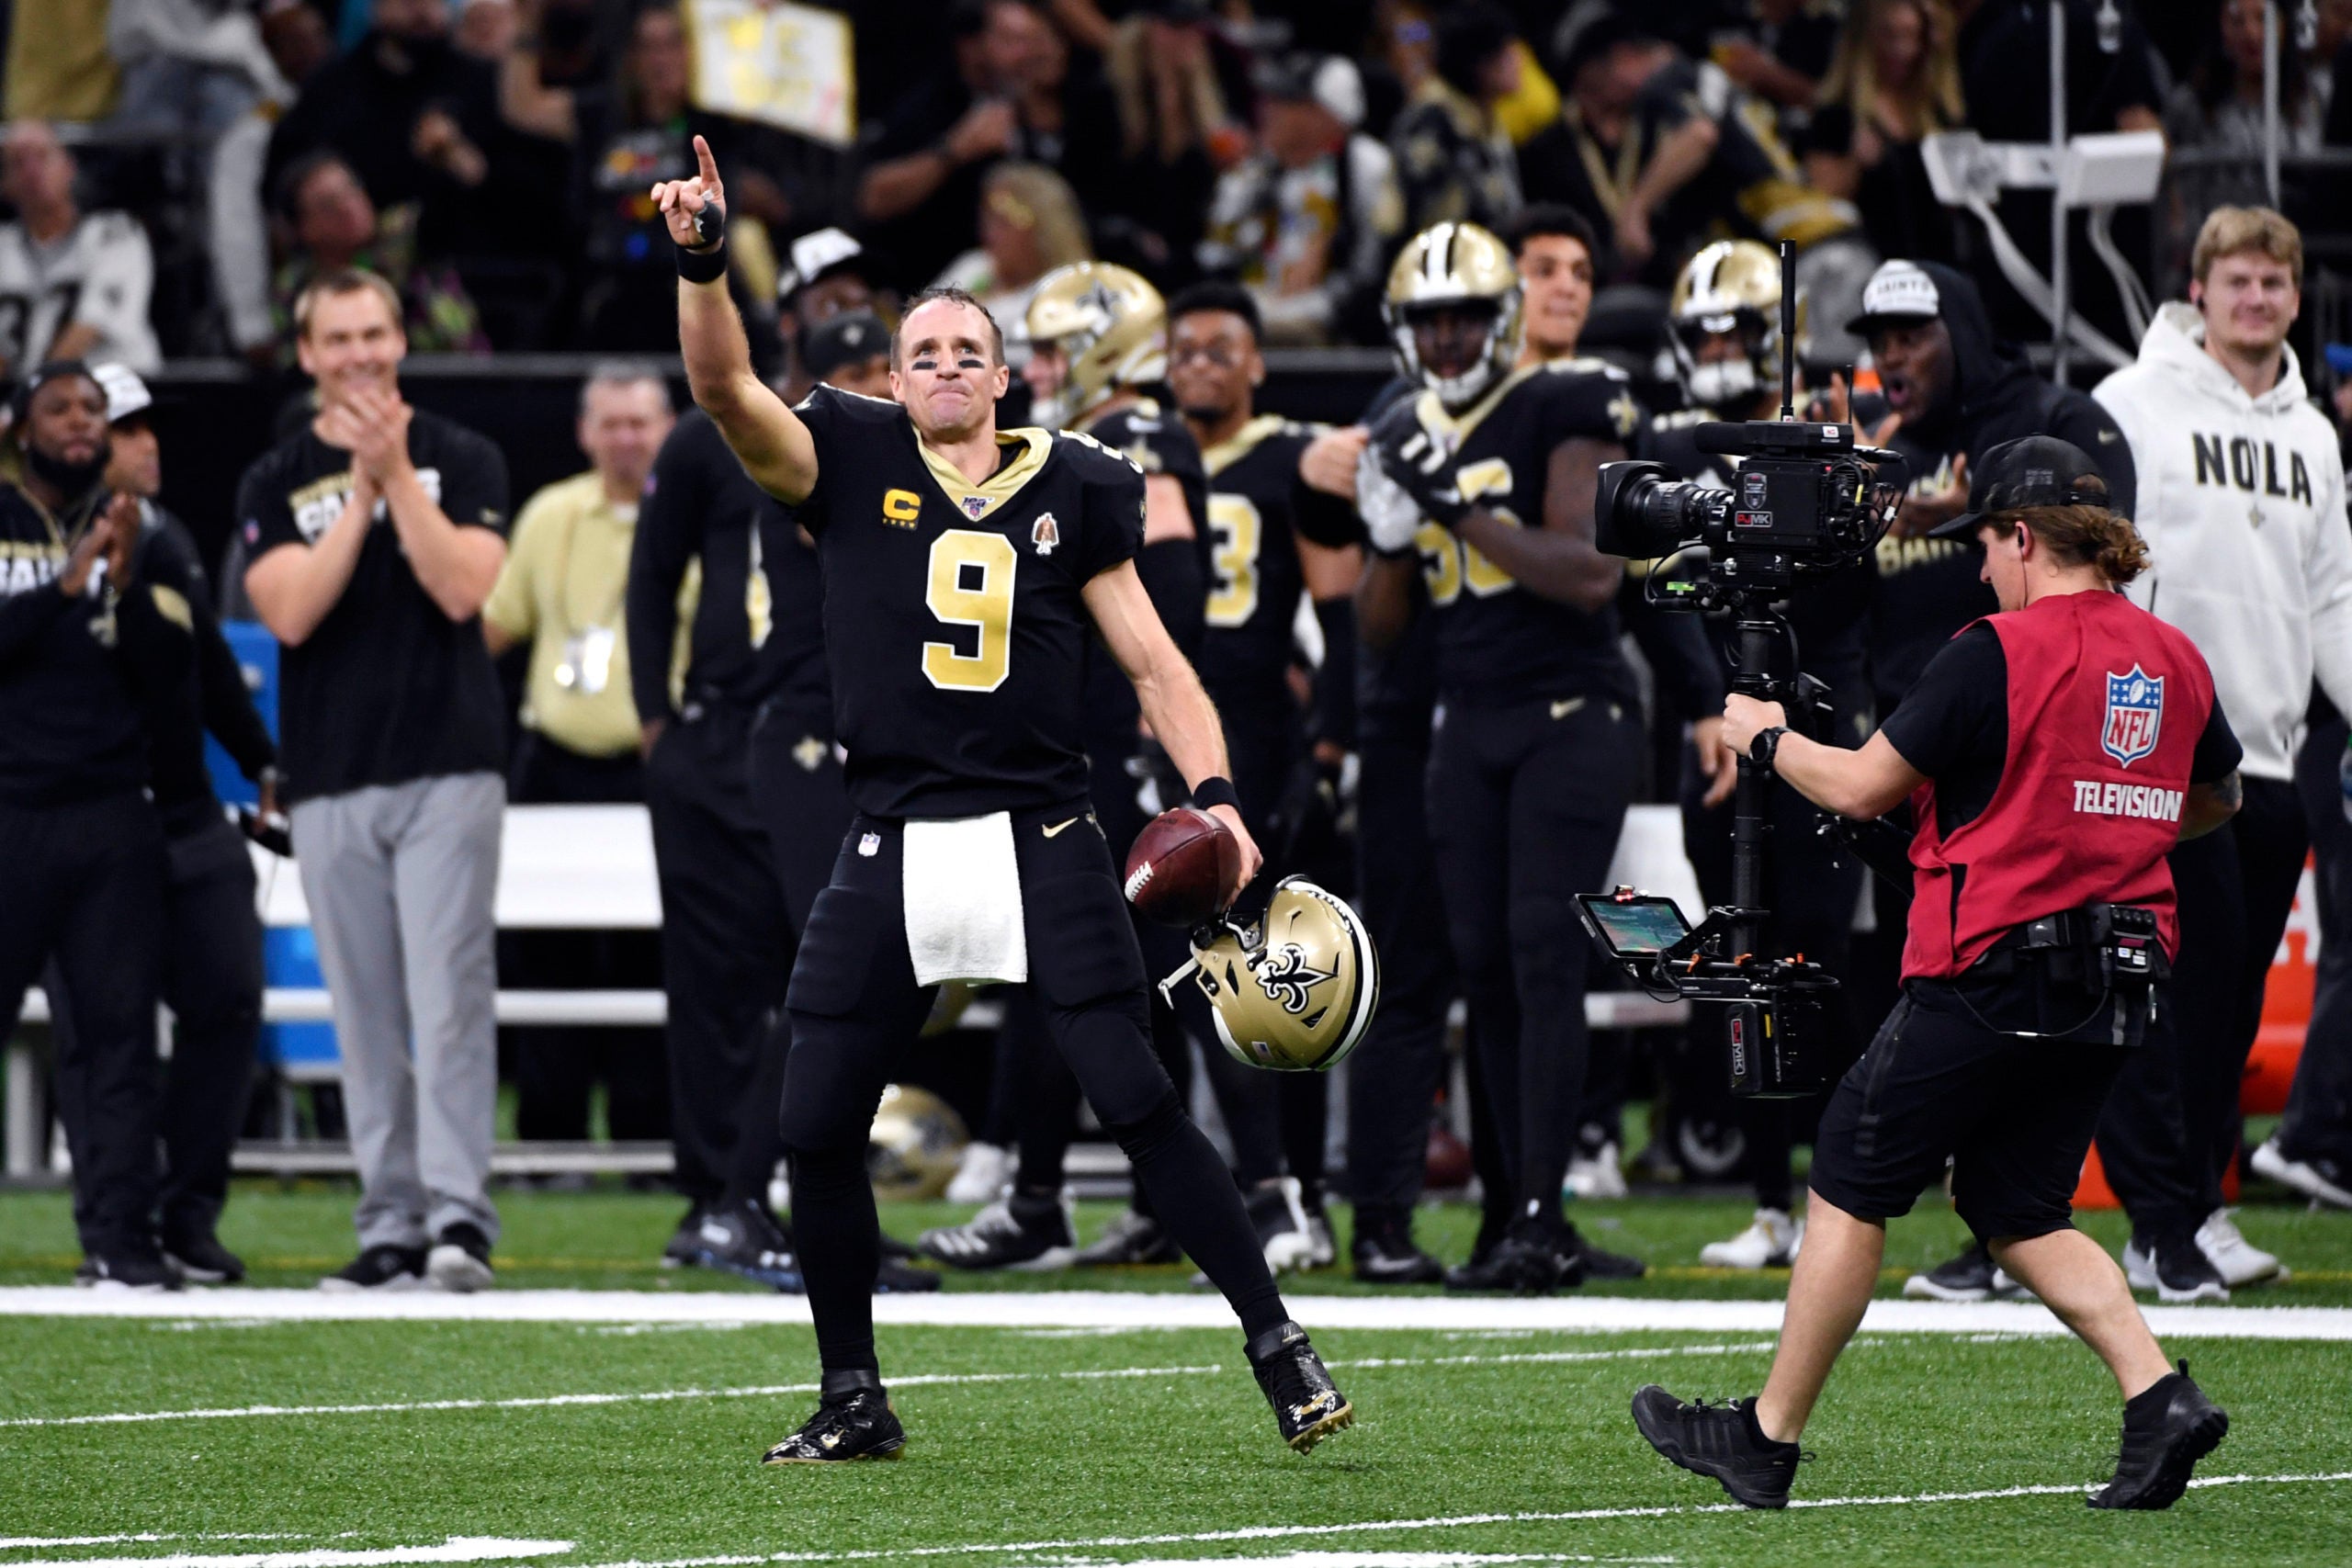 When will Drew Brees make the Pro Football Hall of Fame?